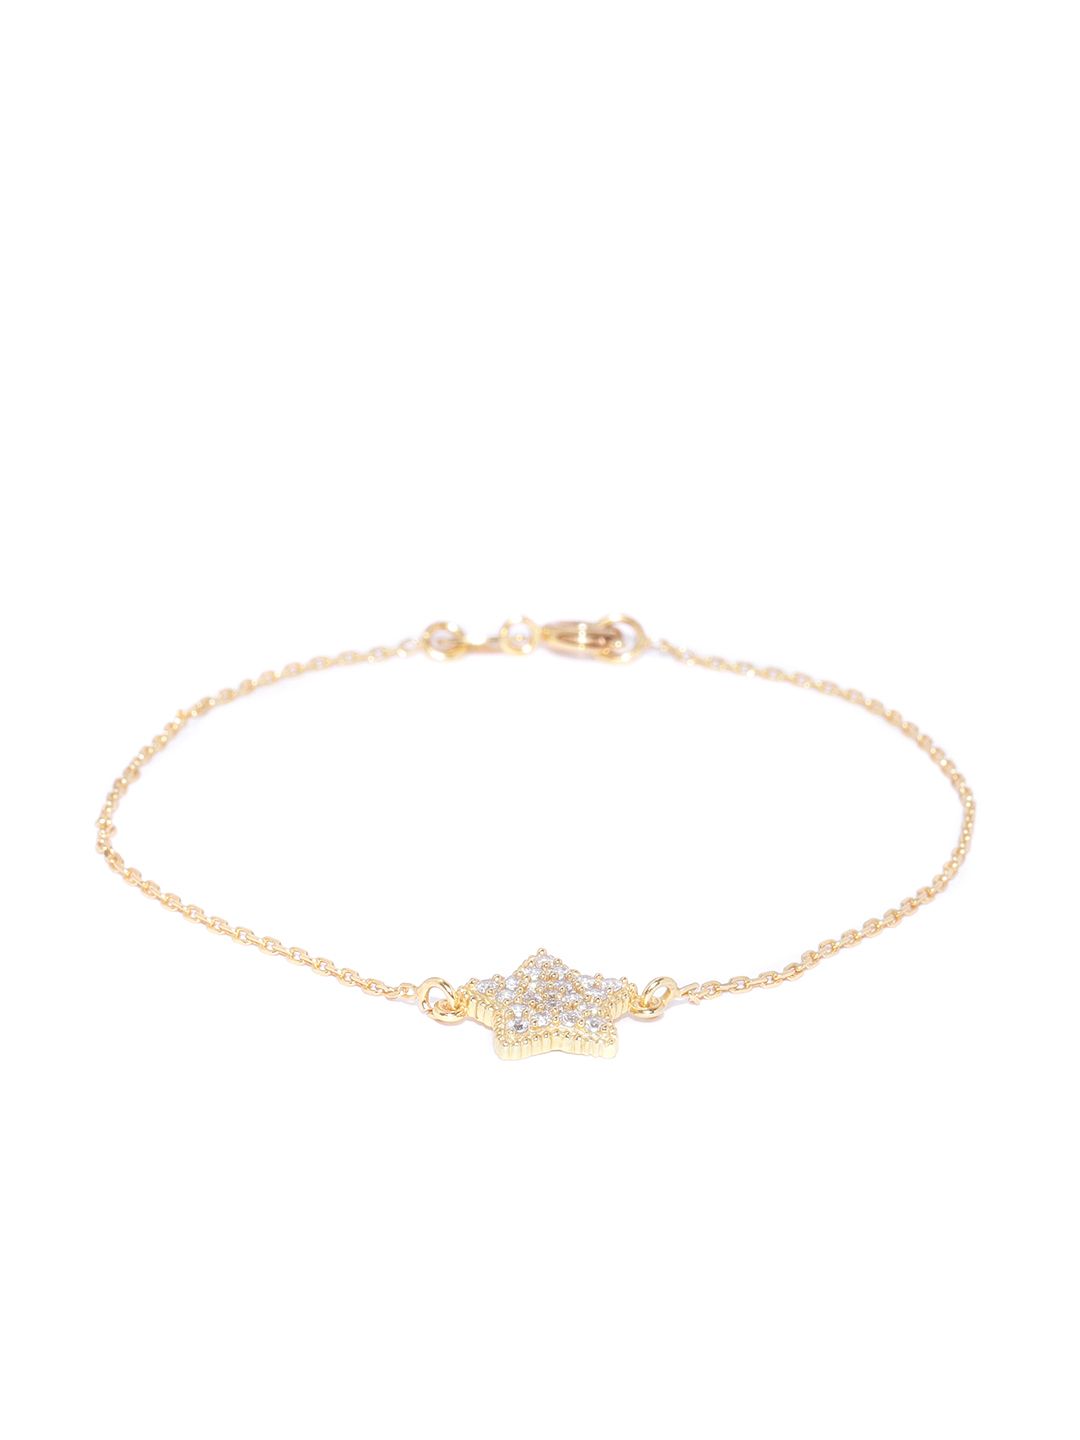 Carlton London Gold-Plated Stone-Studded Charm Bracelet Price in India